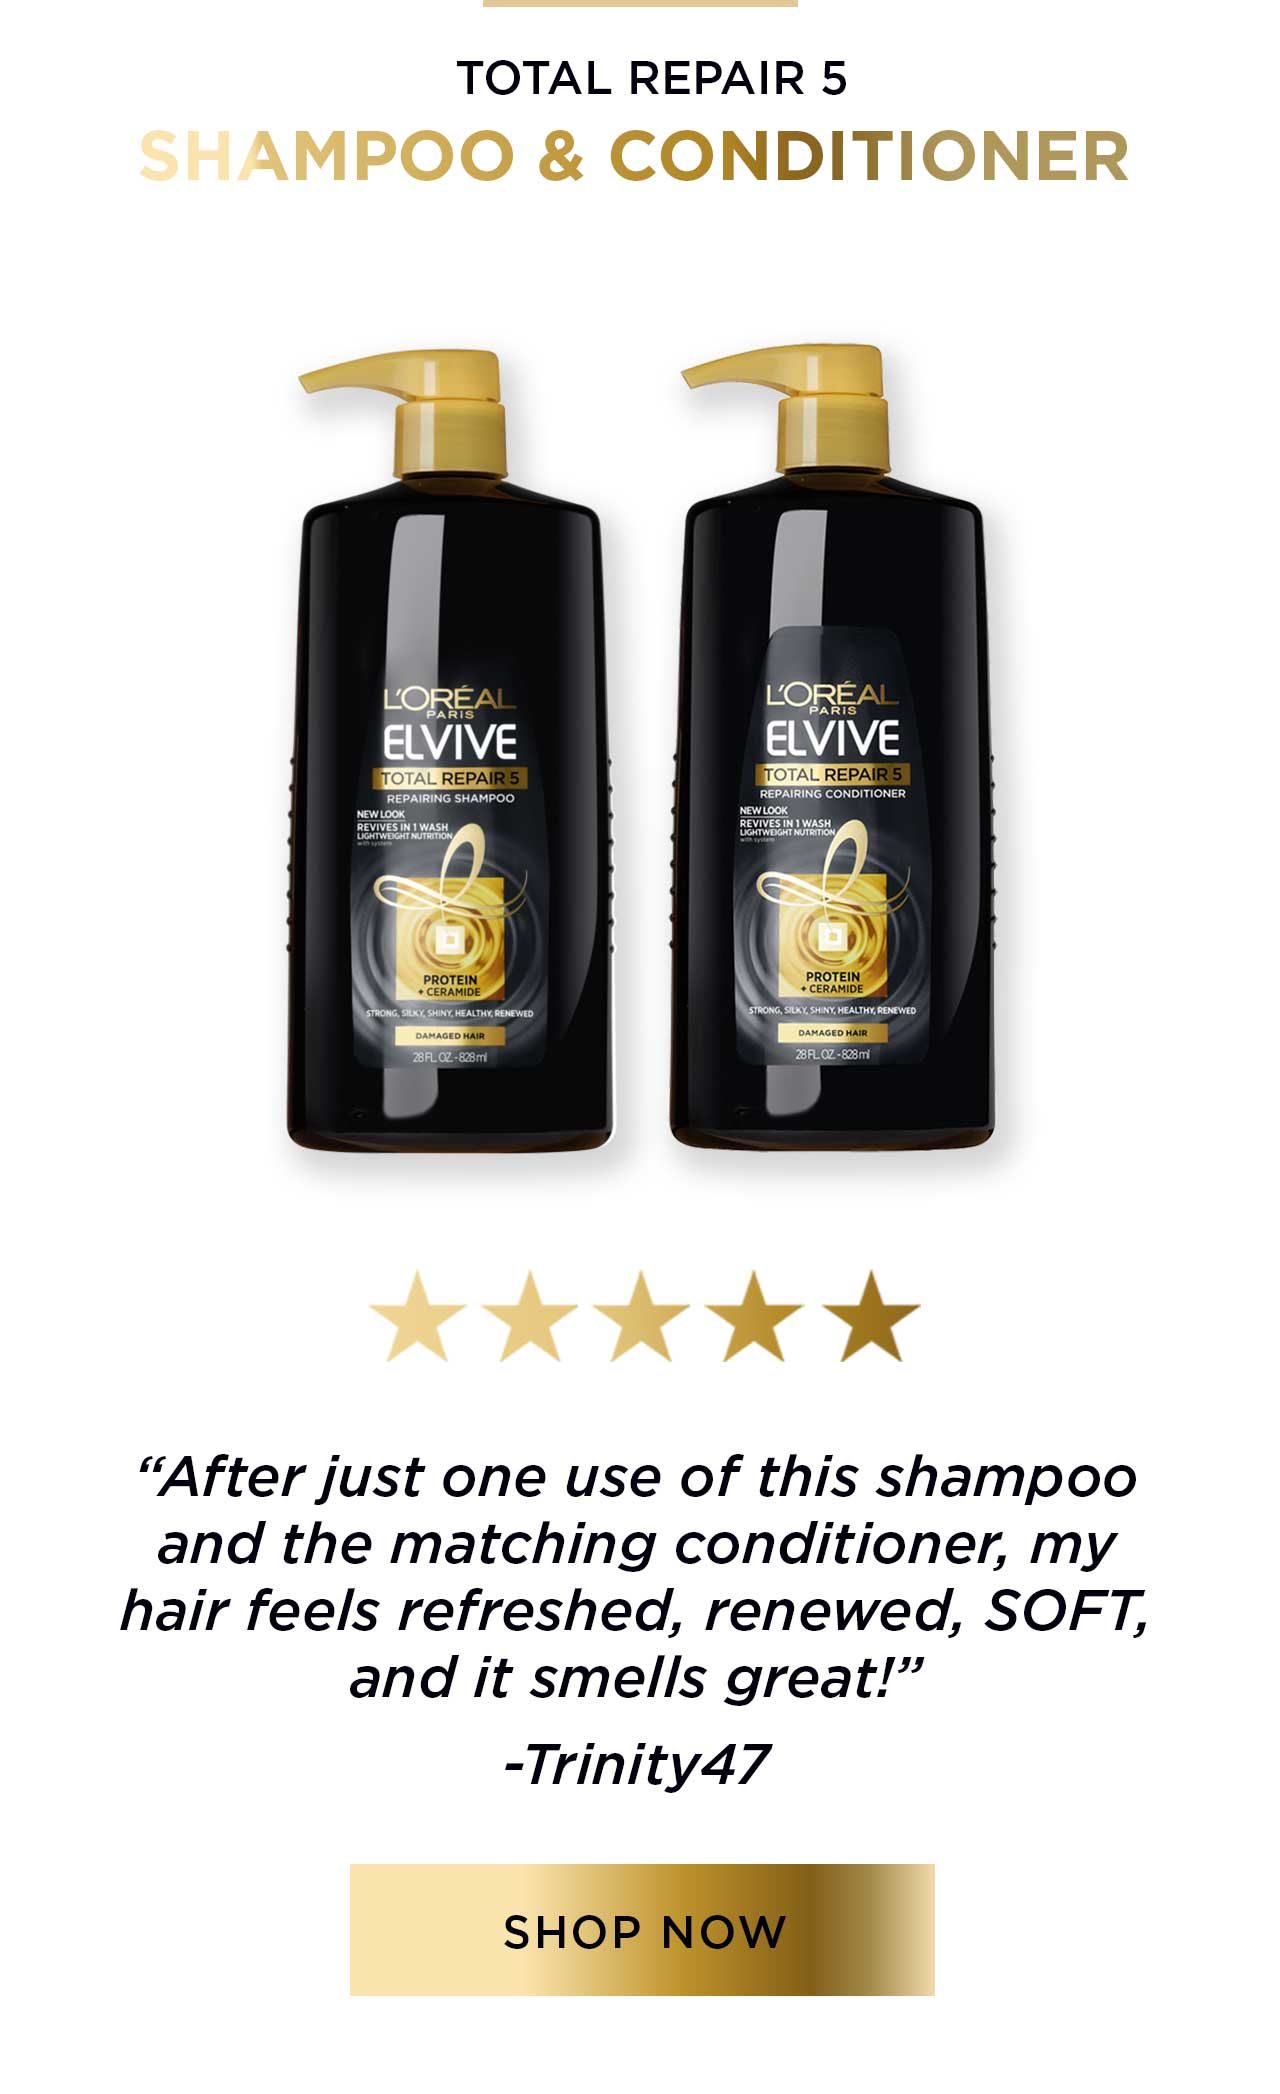 Total Repair 5 - Shampoo And Conditioner - Shop Now